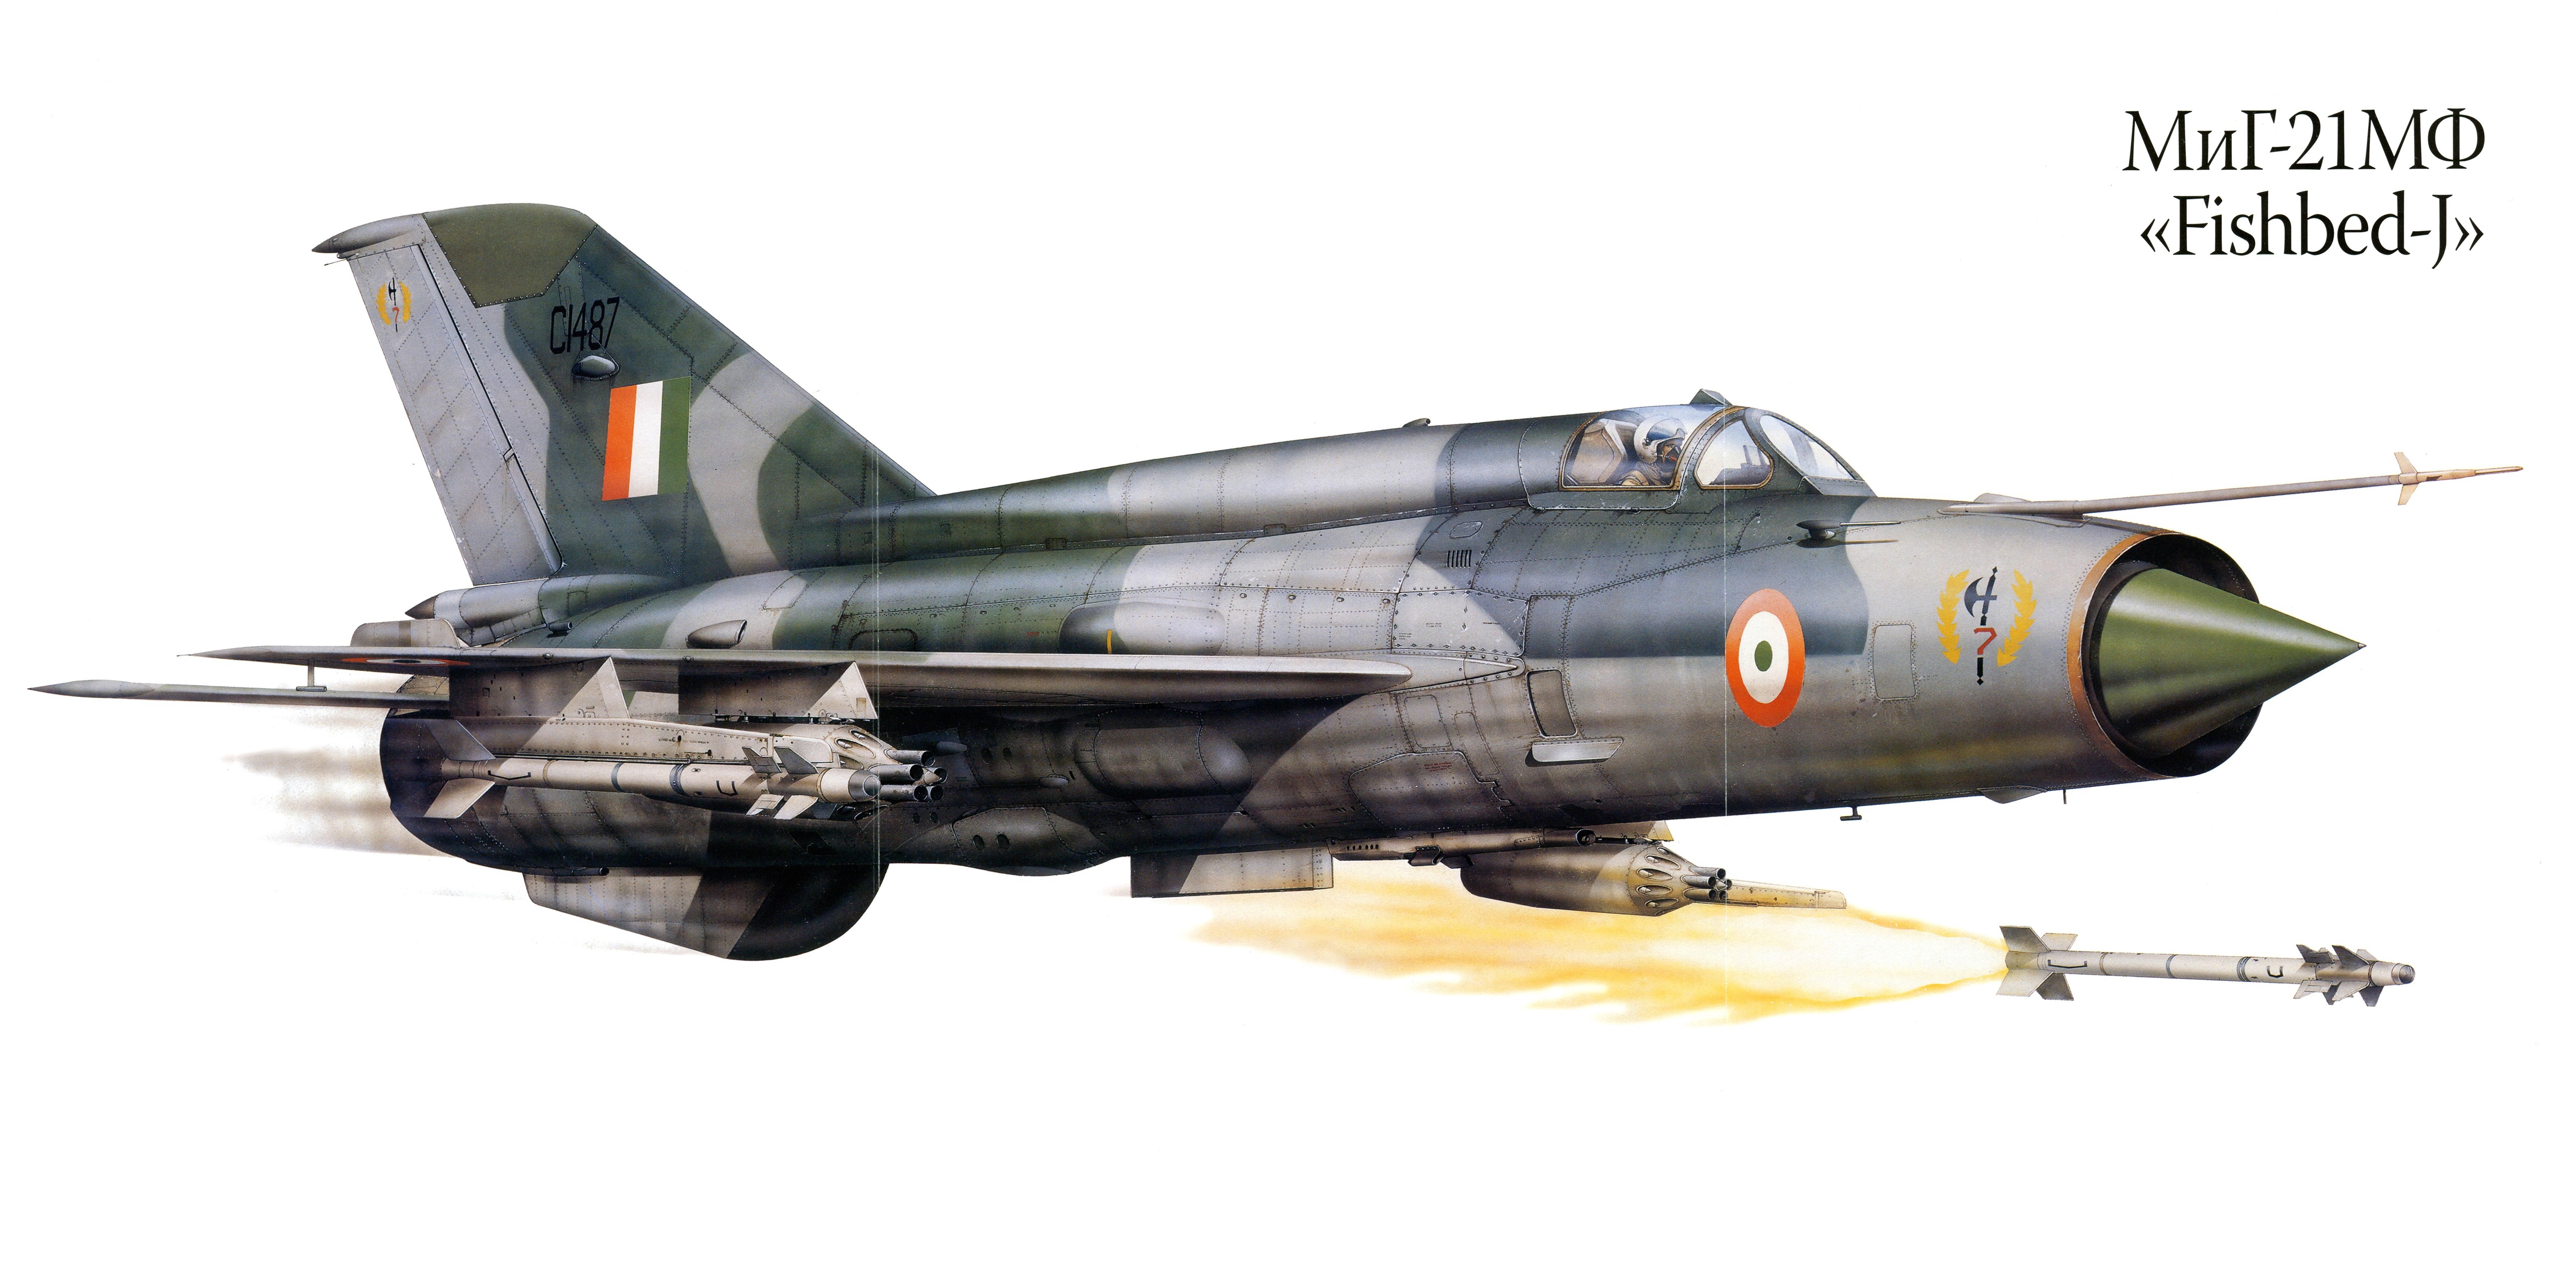 mig 21mf, Military, War, Art, Painting, Airplane, Aircraft, Weapon, Fighter Wallpaper